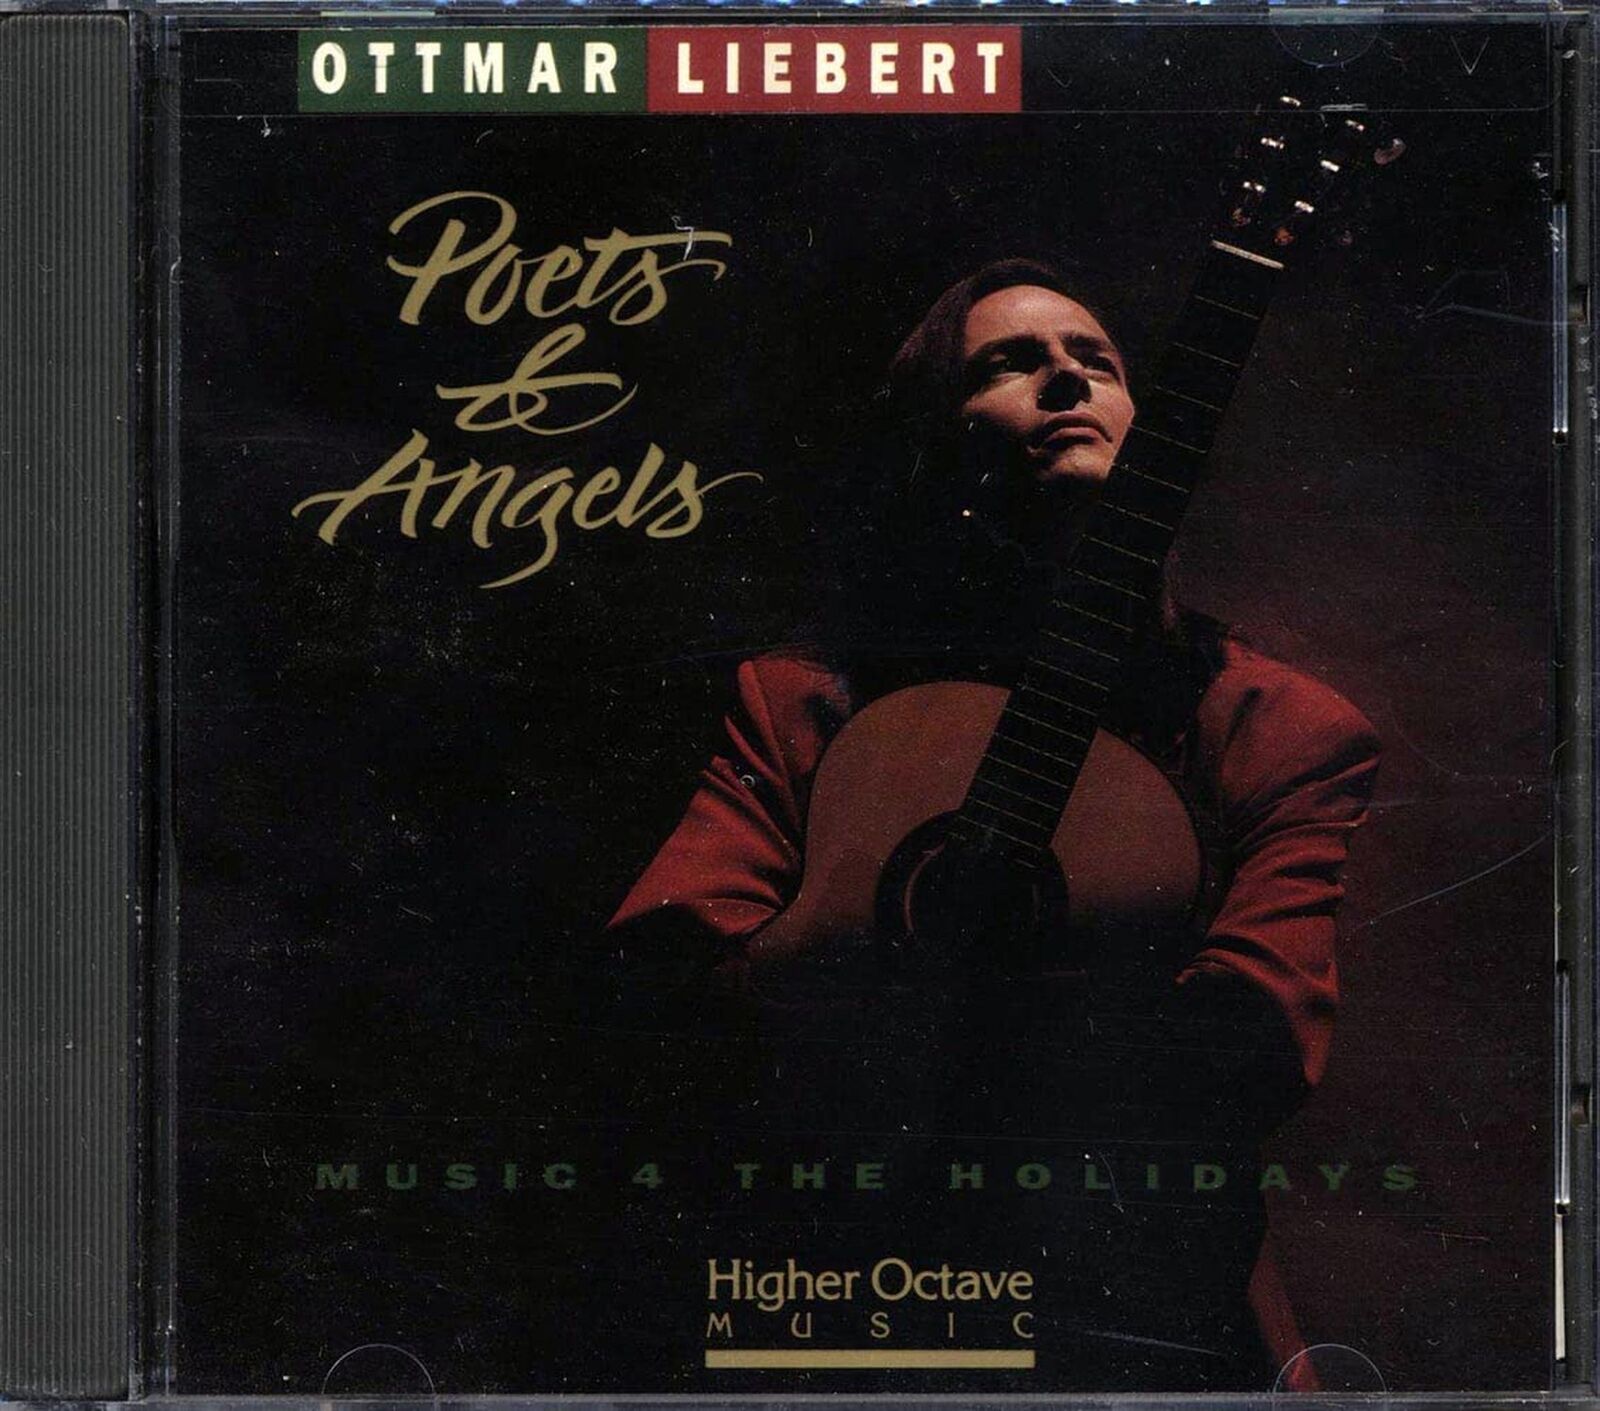 Poets & Angels: Music 4 The Holidays [Audio CD]